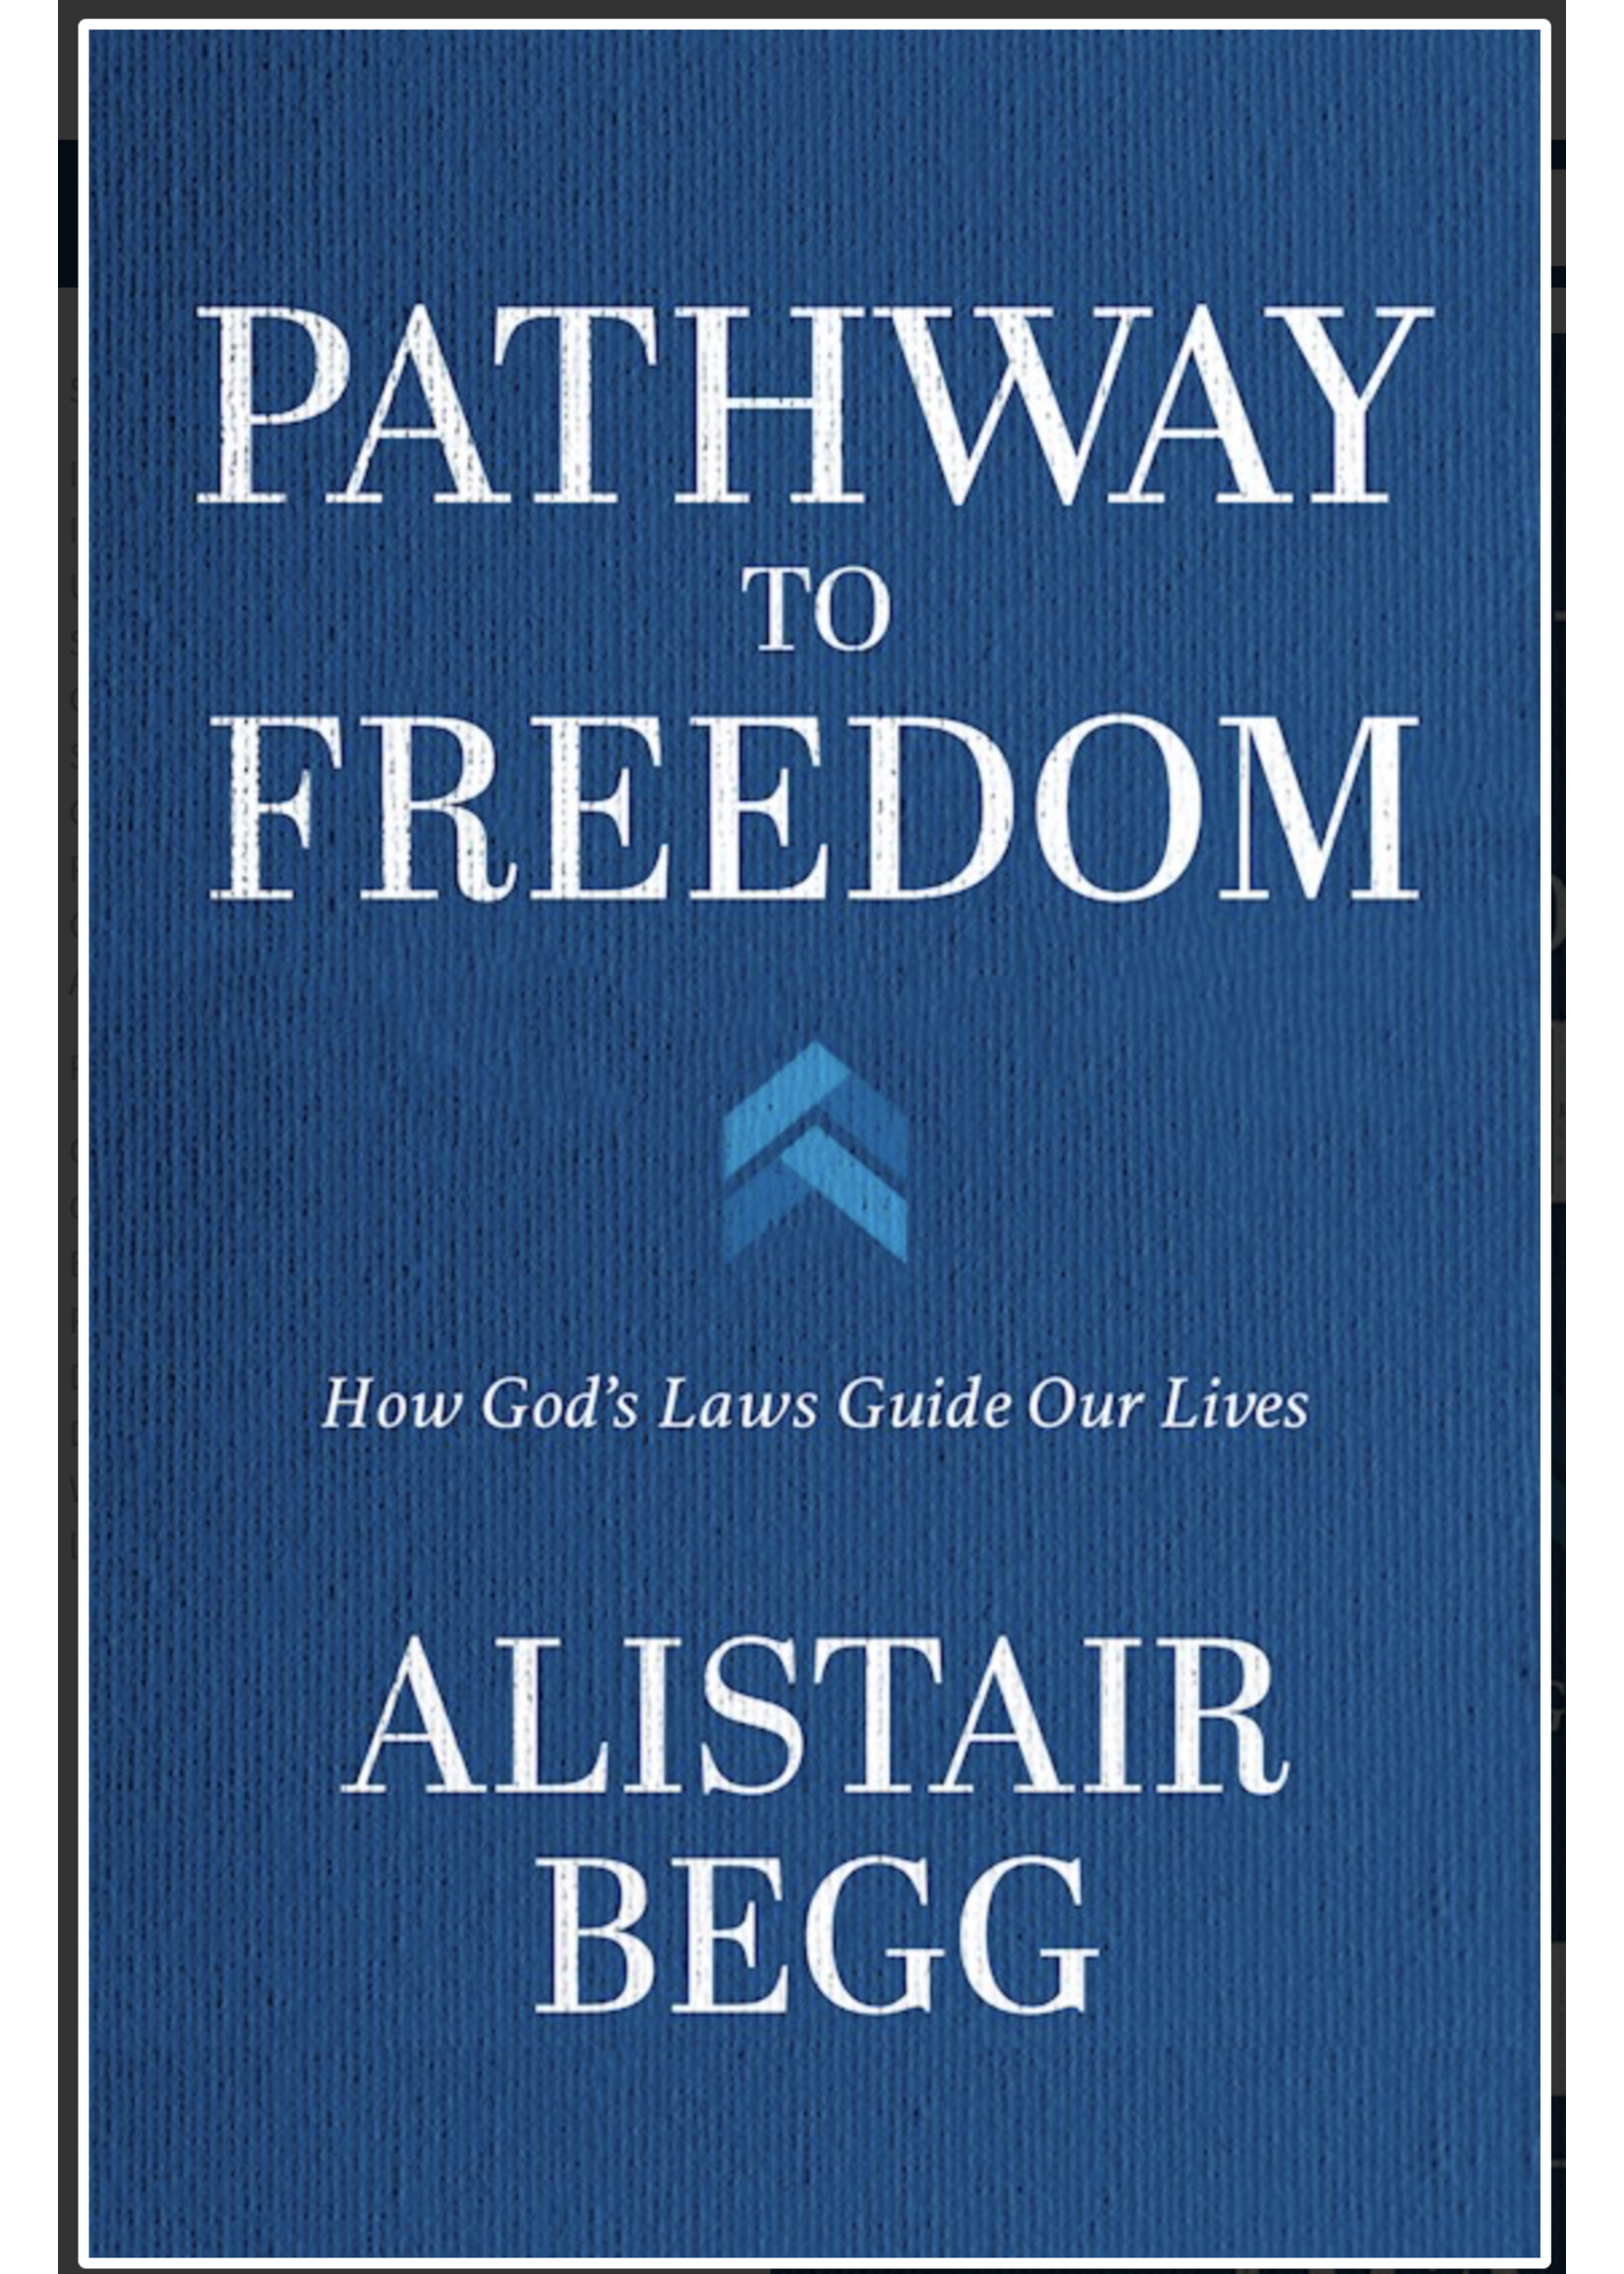 Pathway to Freedom: How God's Laws Guide Our Lives [Alistair Begg]